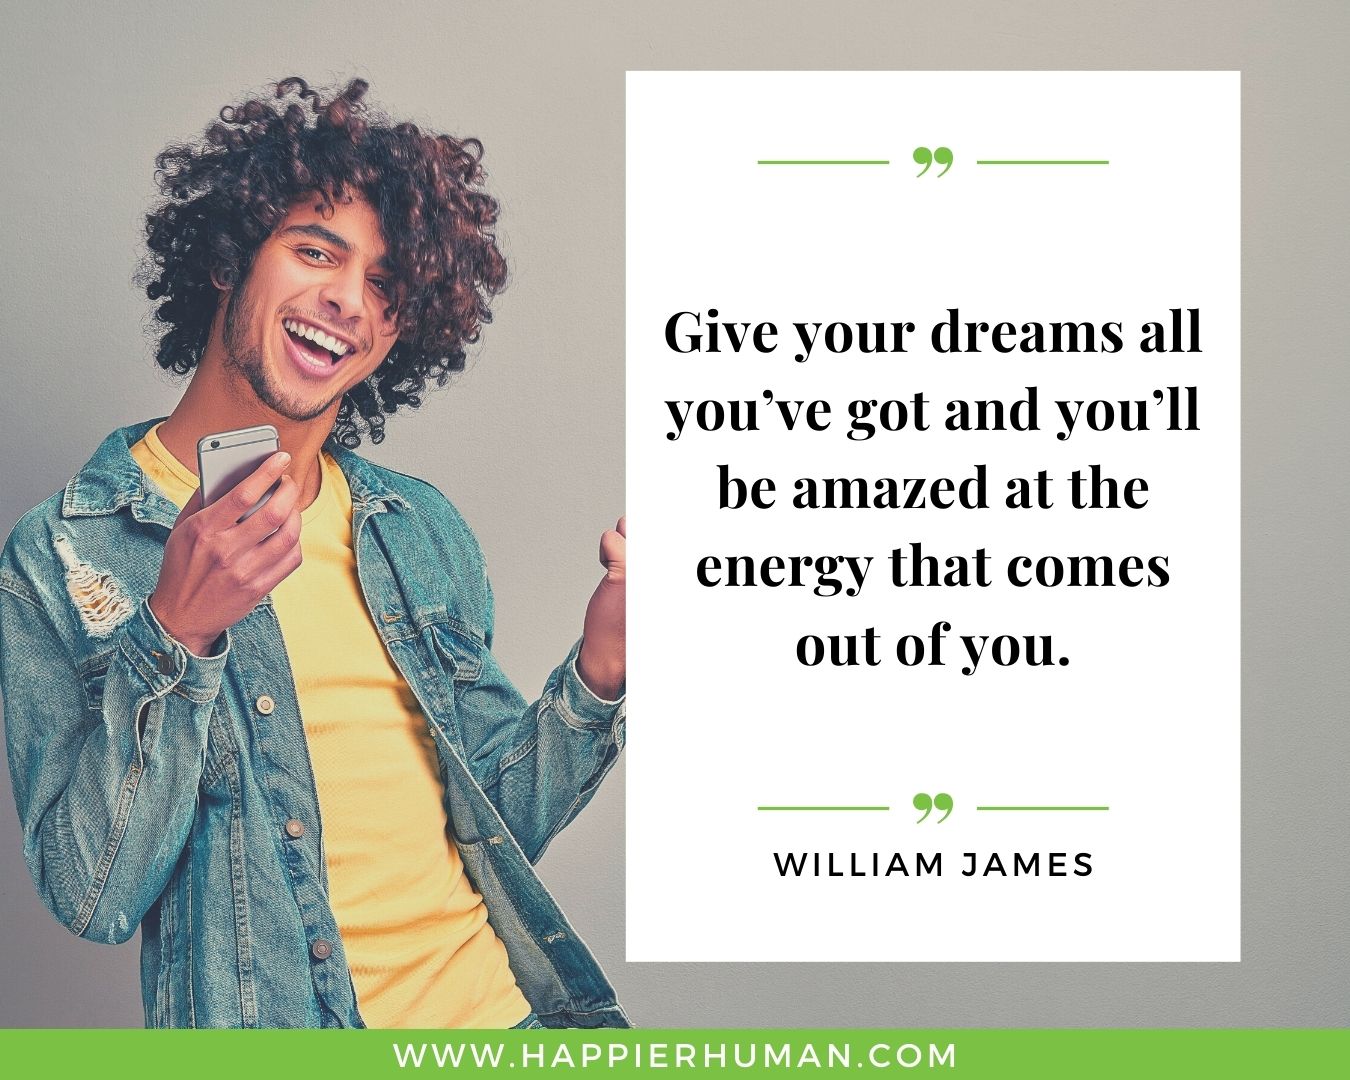 Positive Energy Quotes - “Give your dreams all you’ve got and you’ll be amazed at the energy that comes out of you.” - William James